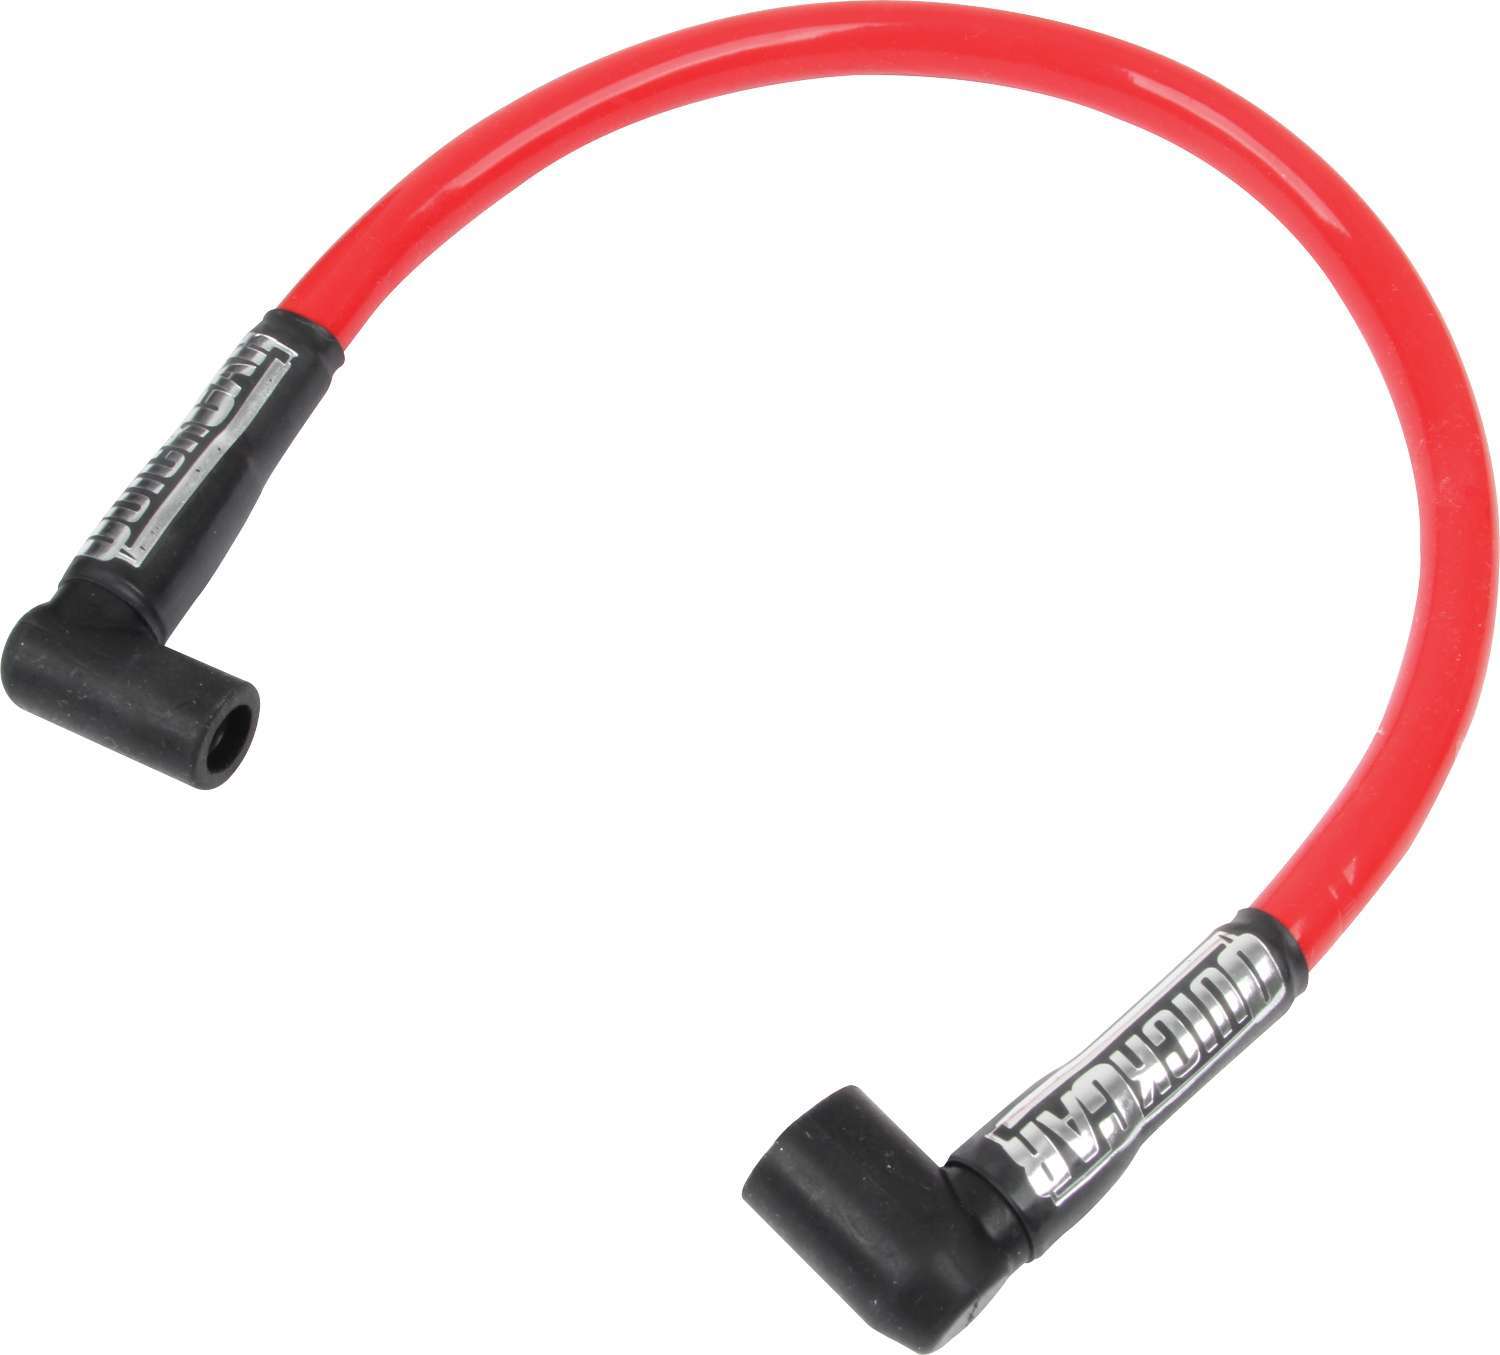 QuickCar 40-181 Coil Wire, Spiral Core, 11.5 mm, Sleeved, 18 in Long, Red, HEI Style Terminal, Each